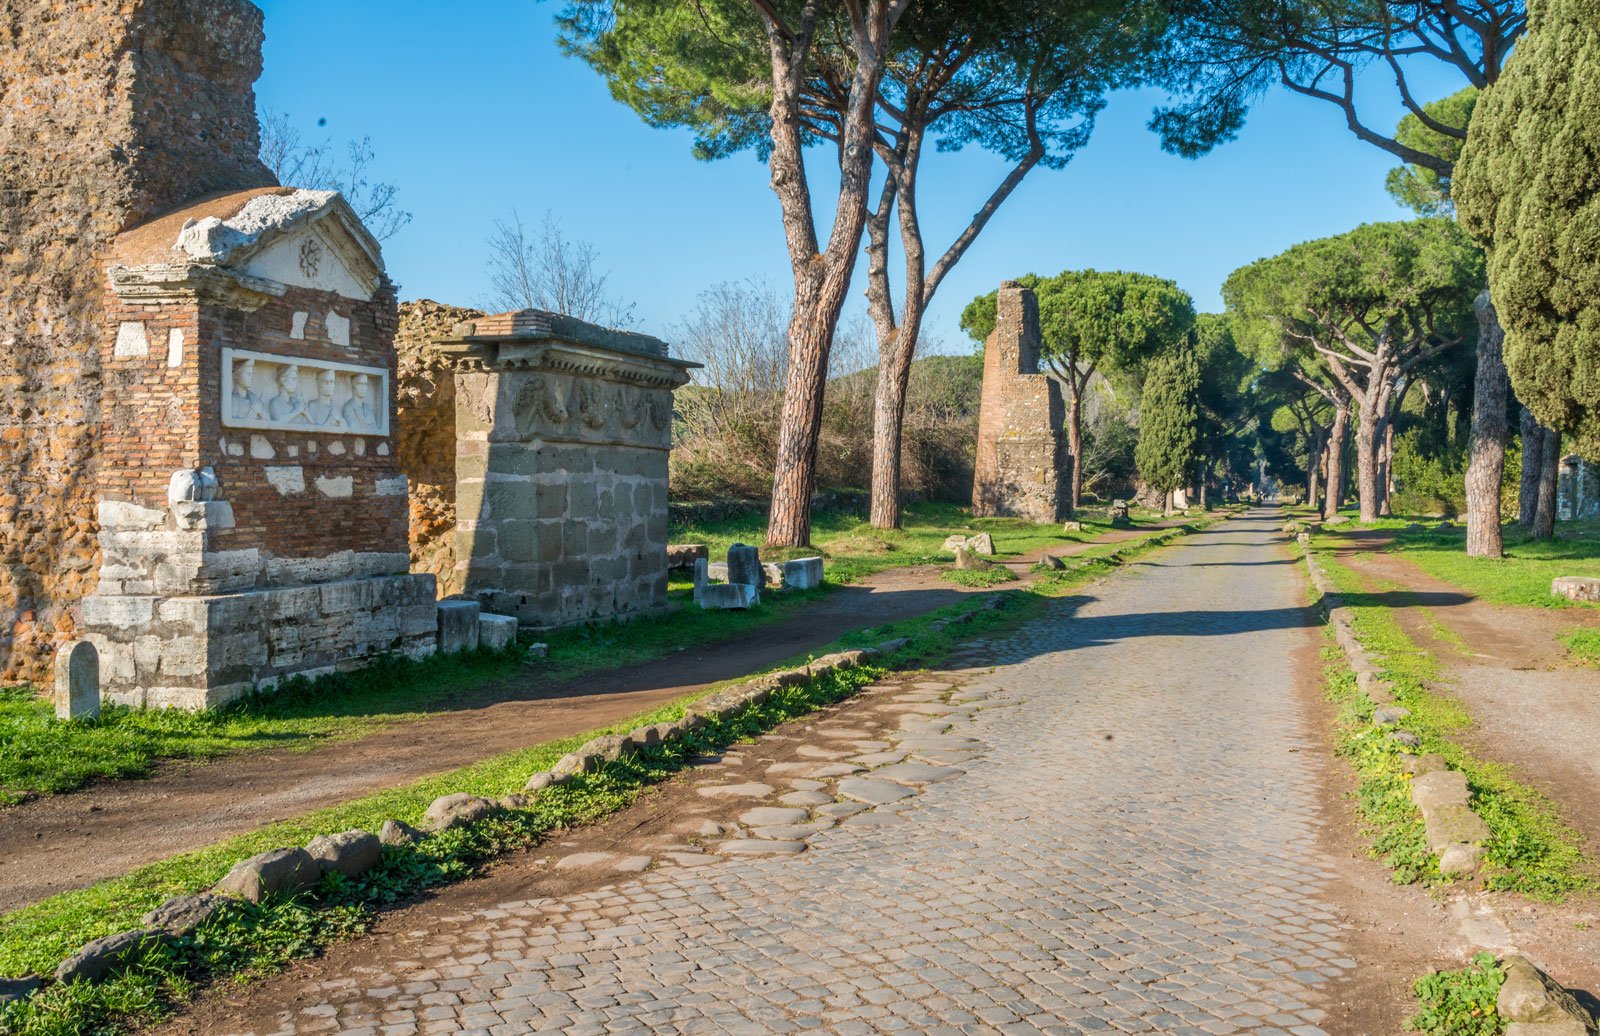 A peaceful scene on the Appian Way, just beyond the walls of Rome